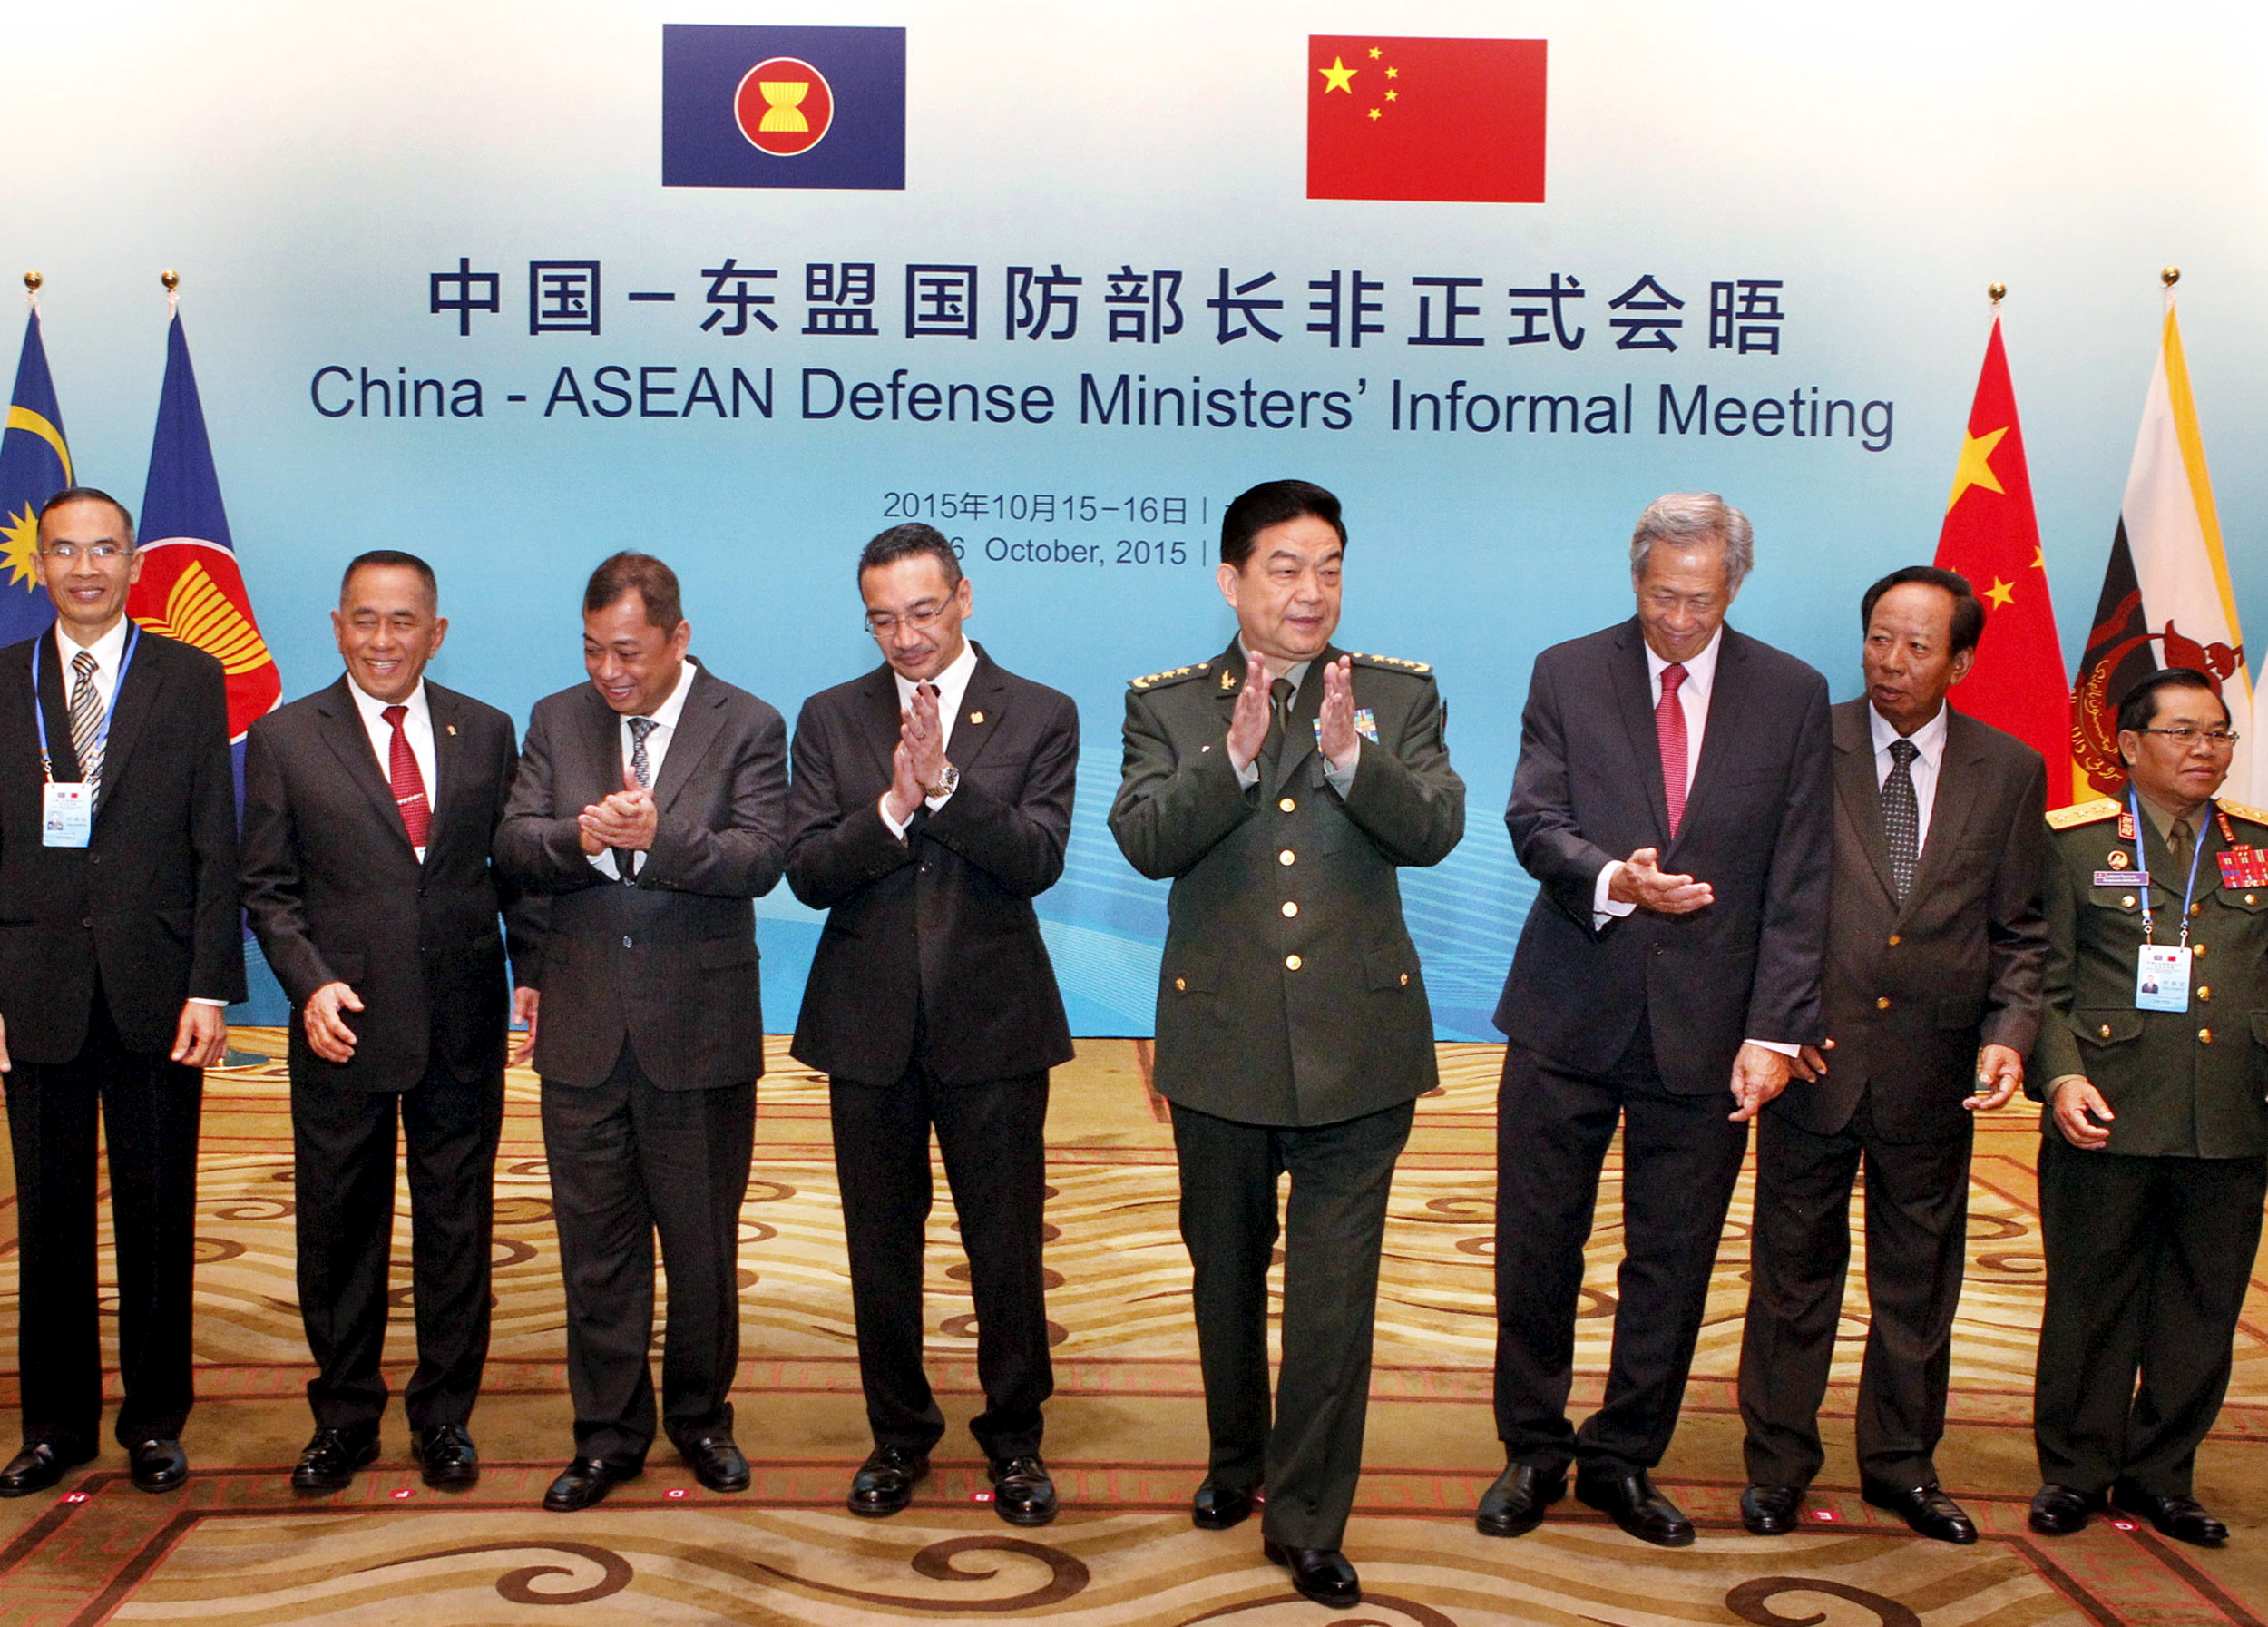 Chinese Defense Minister Chang Wanquan (fourth from right) claps next to his counterparts from the Southeast Asian Nations (ASEAN) during the China-ASEAN Defense Ministers' Informal Meeting in Beijing, China, October 16, 2015. (Stringer—Reuters)